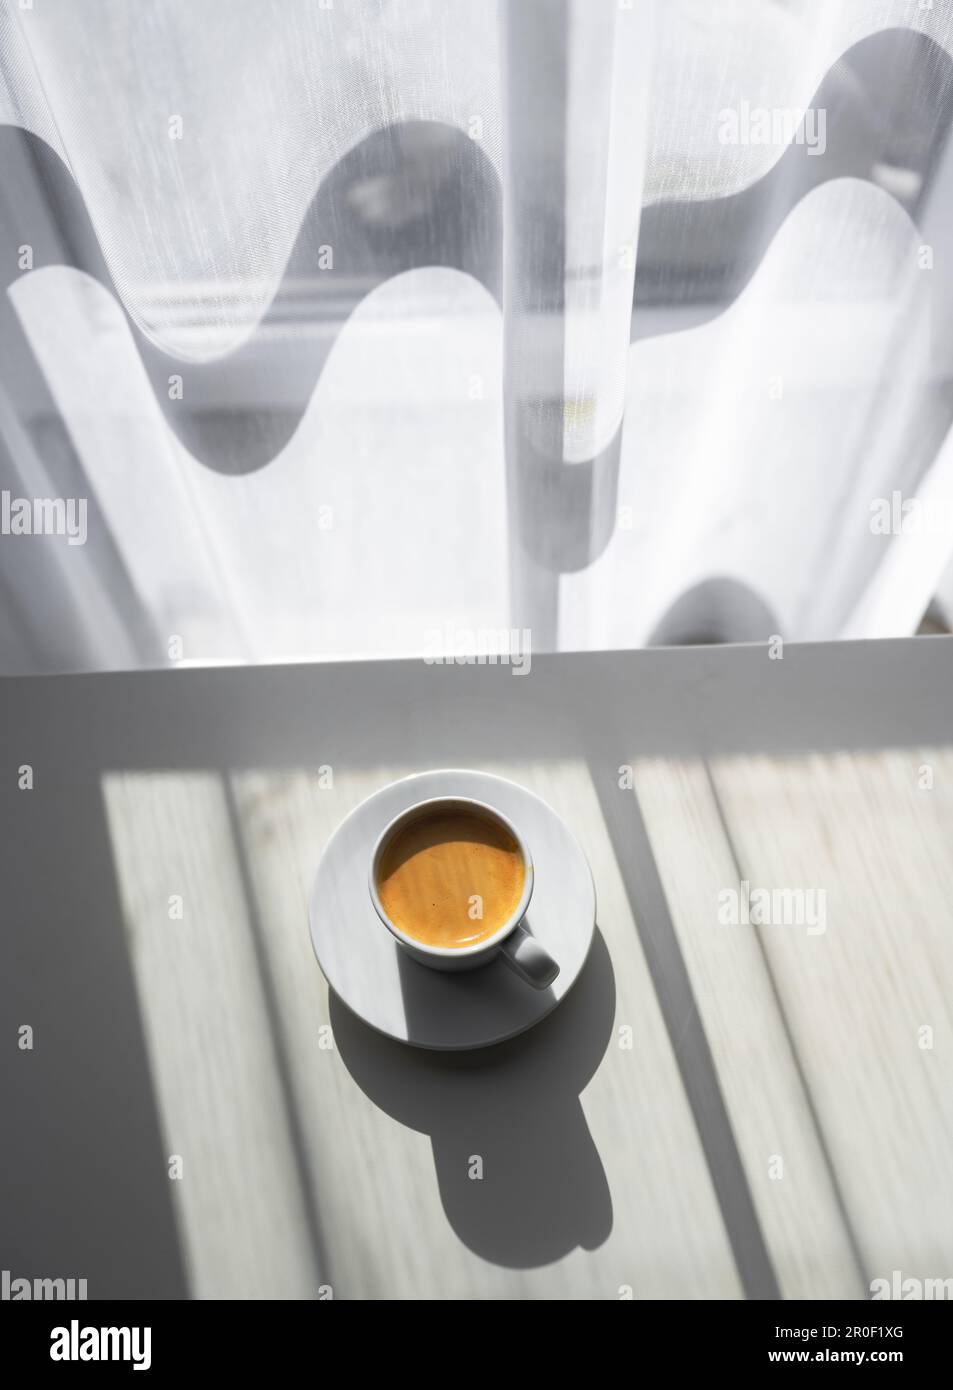 Espresso coffee cup on table near window with morning light. Food and drink photography Stock Photo